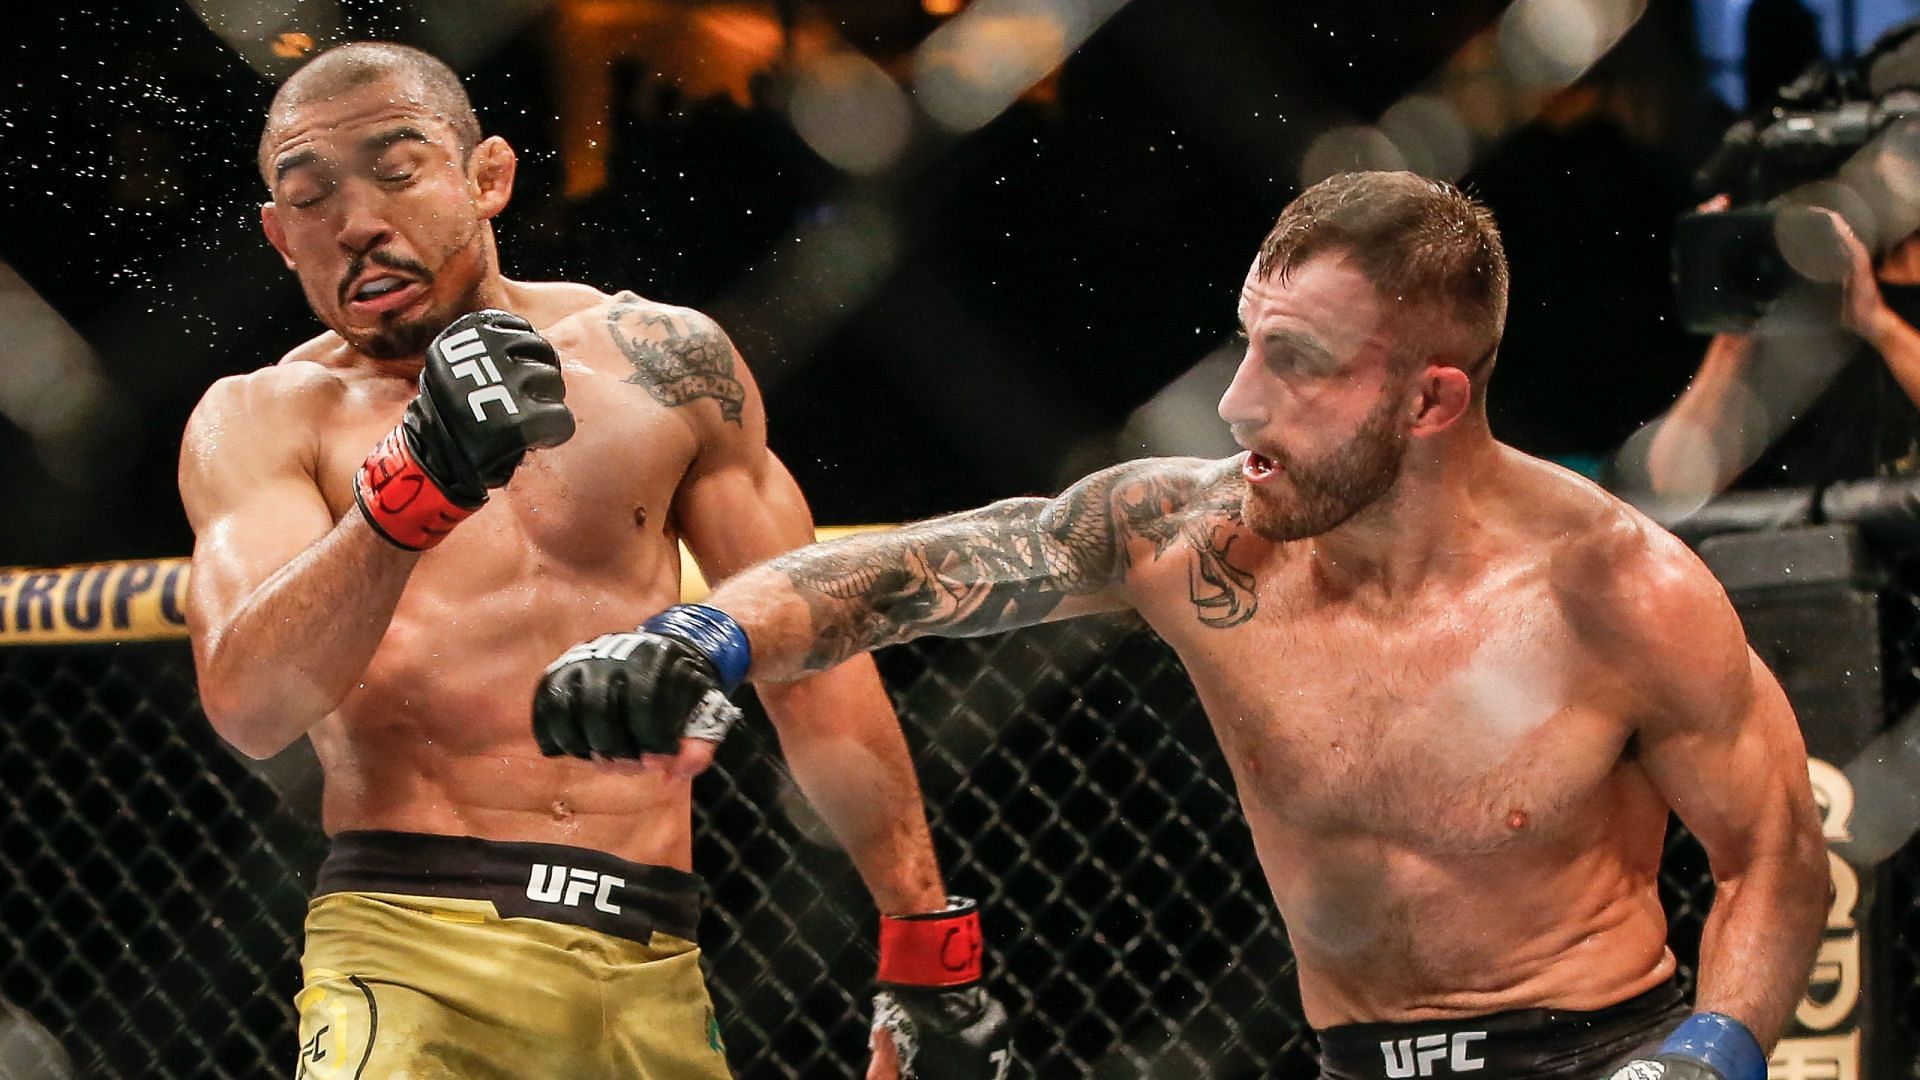 Alexander Volkanovski holds a win over another potential featherweight GOAT in Jose Aldo